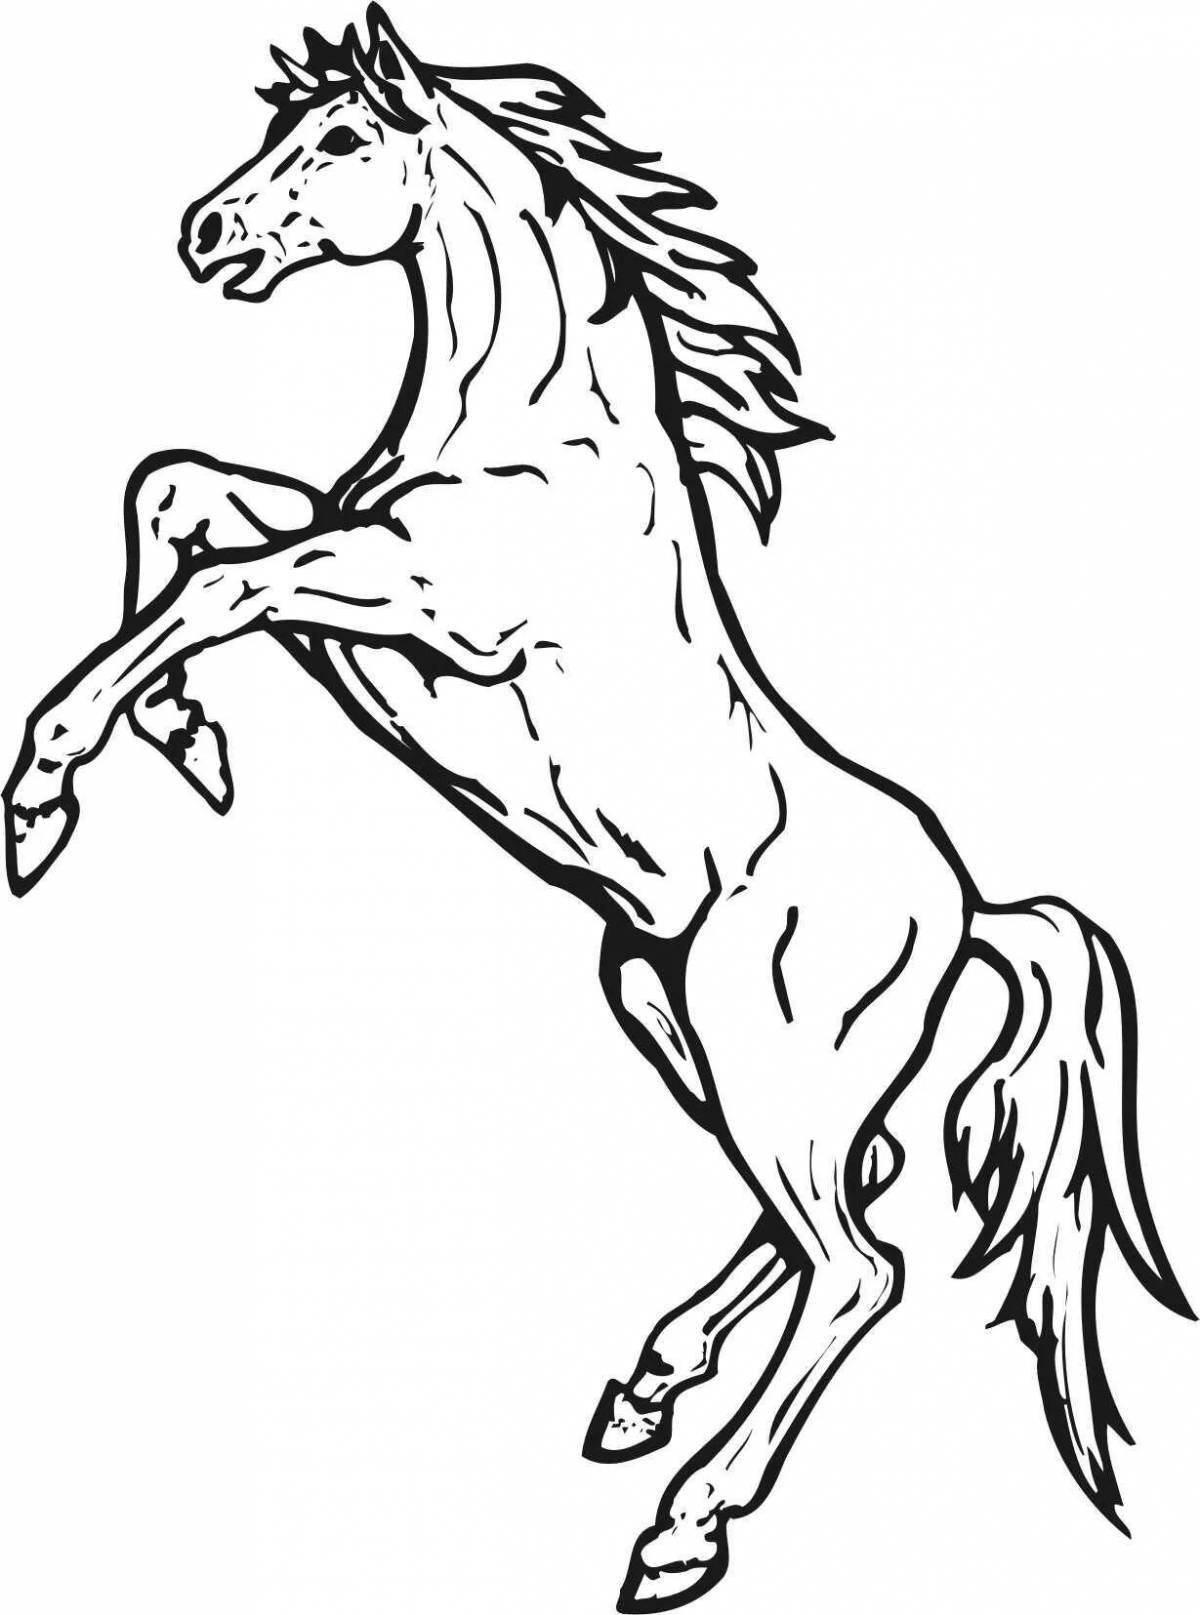 Coloring page of a luxurious rearing horse